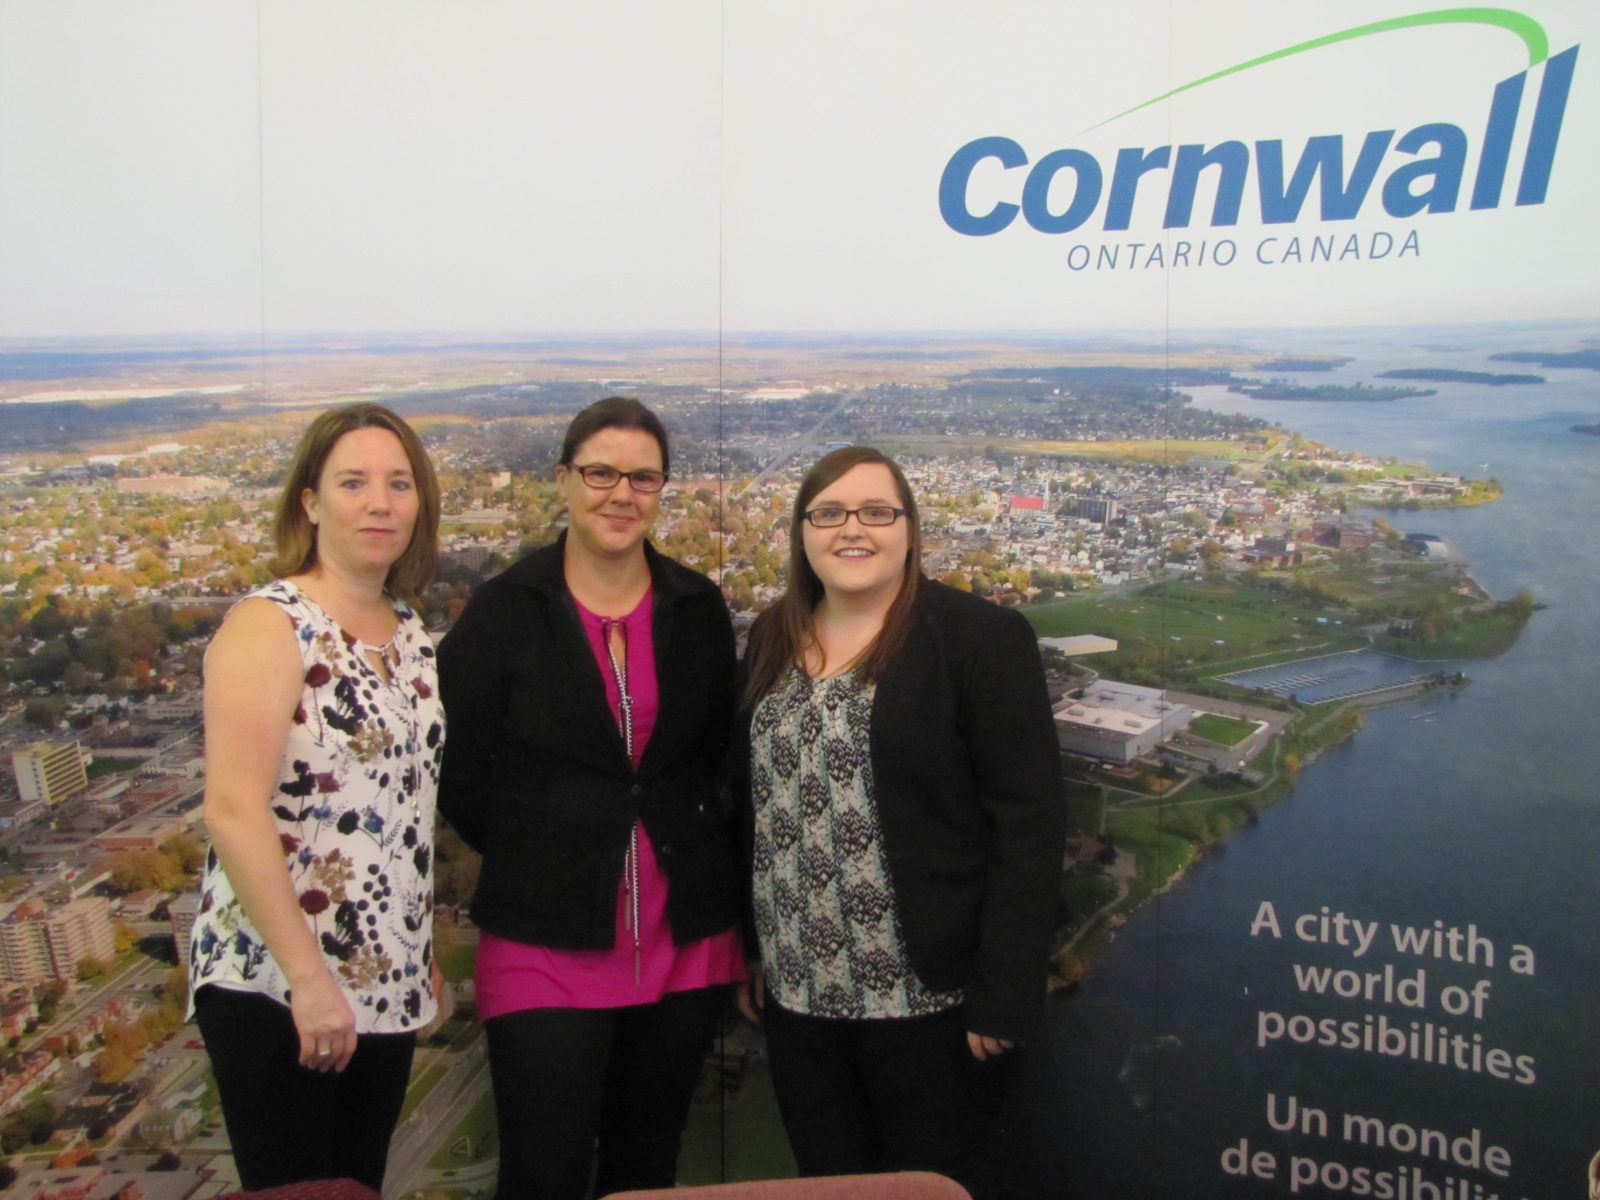 Job Fair showcases the many employment sectors in Cornwall